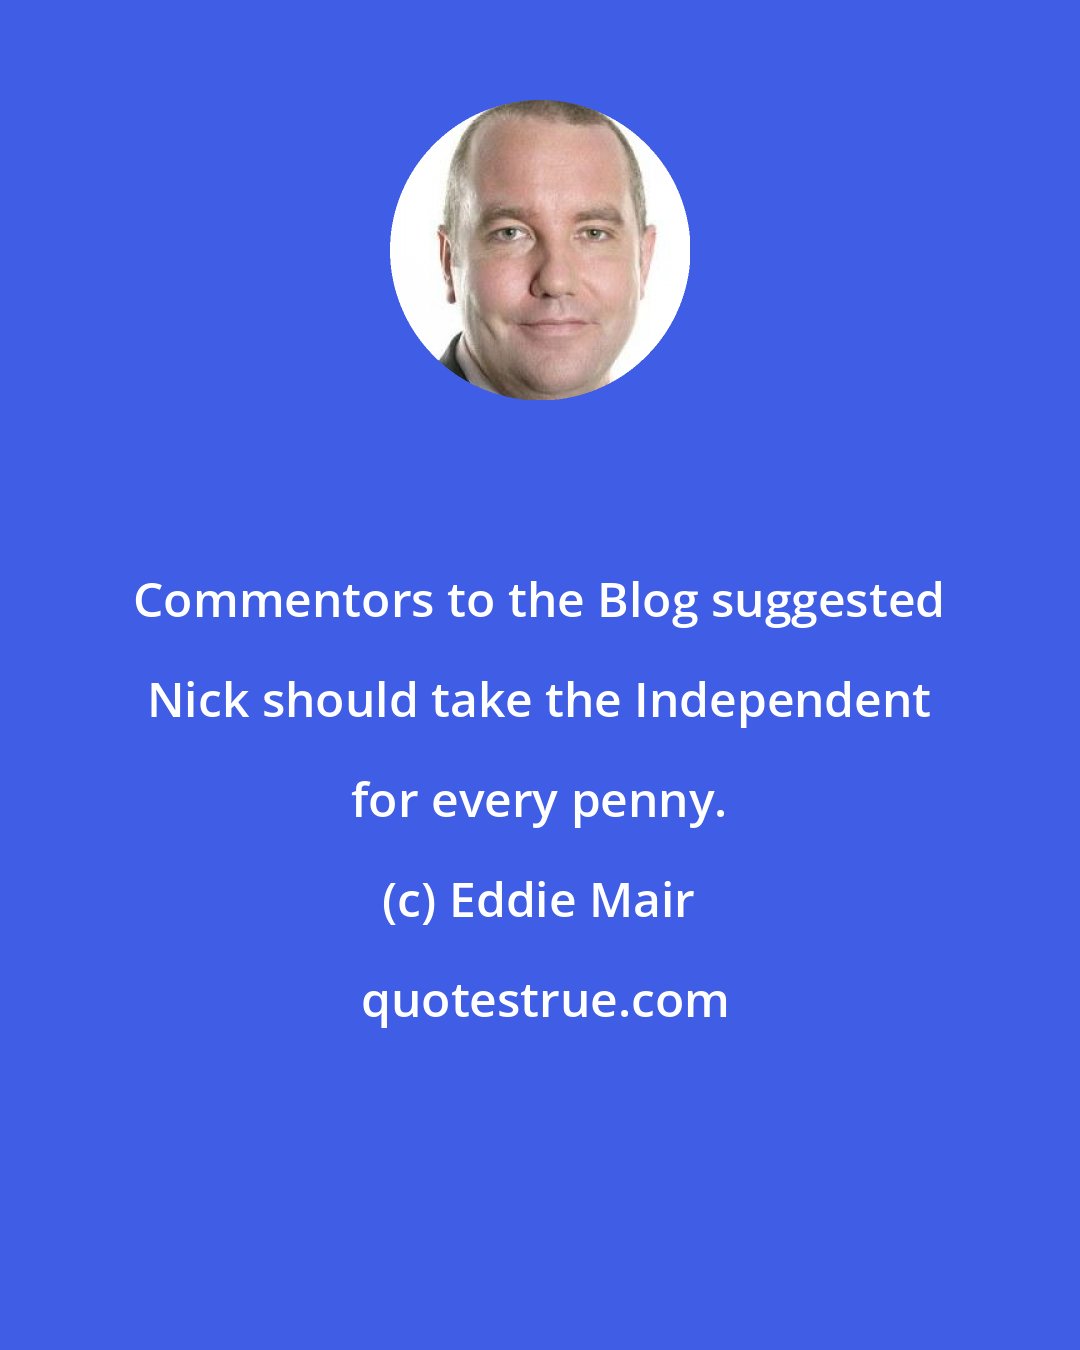 Eddie Mair: Commentors to the Blog suggested Nick should take the Independent for every penny.